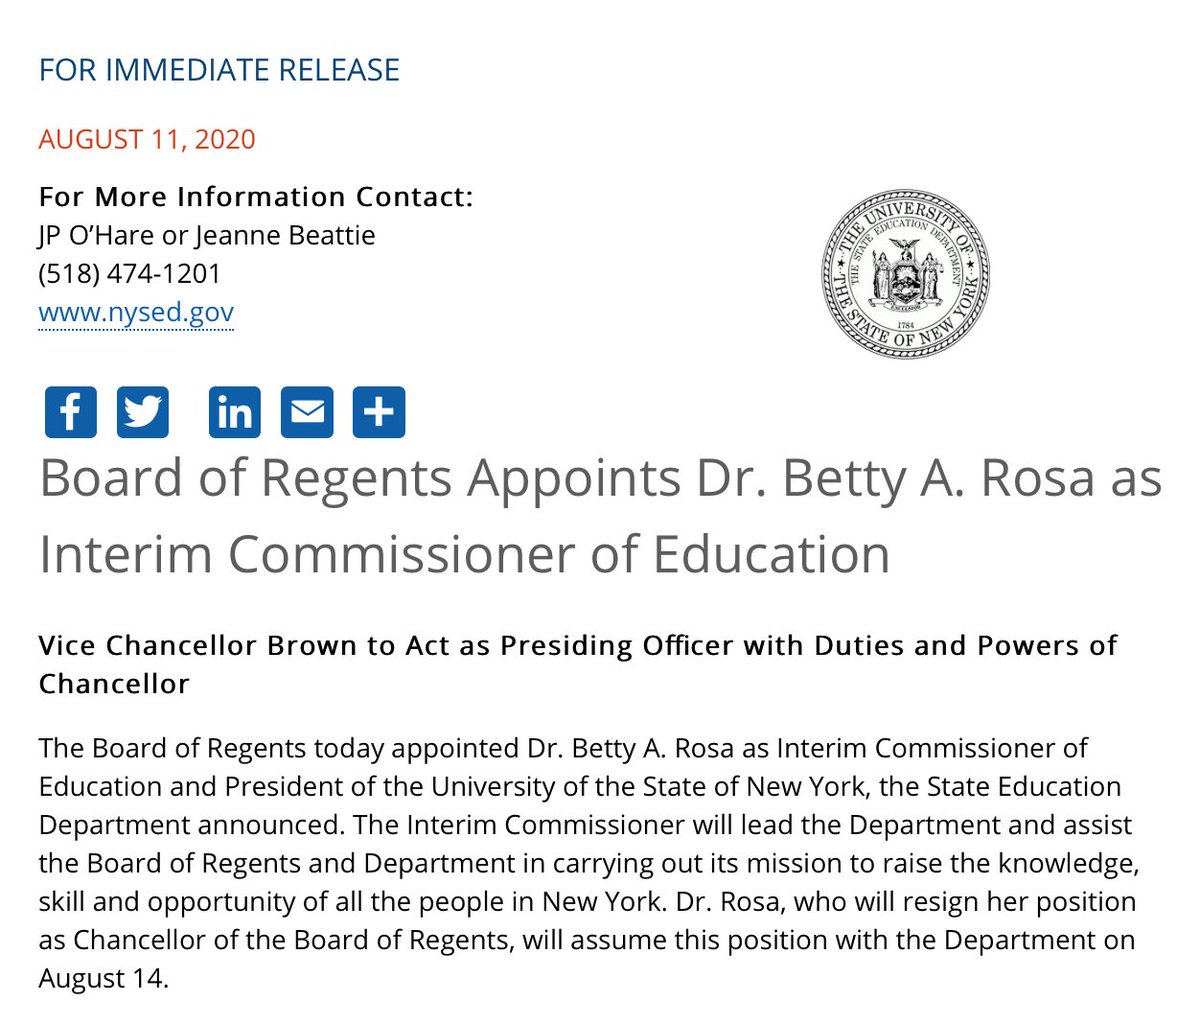 Betty Rosa appointed as Interim Commissioner of Education and President of the University of the State of New York.  http://www.nysed.gov/news/2020/board-regents-appoints-dr-betty-rosa-interim-commissioner-education